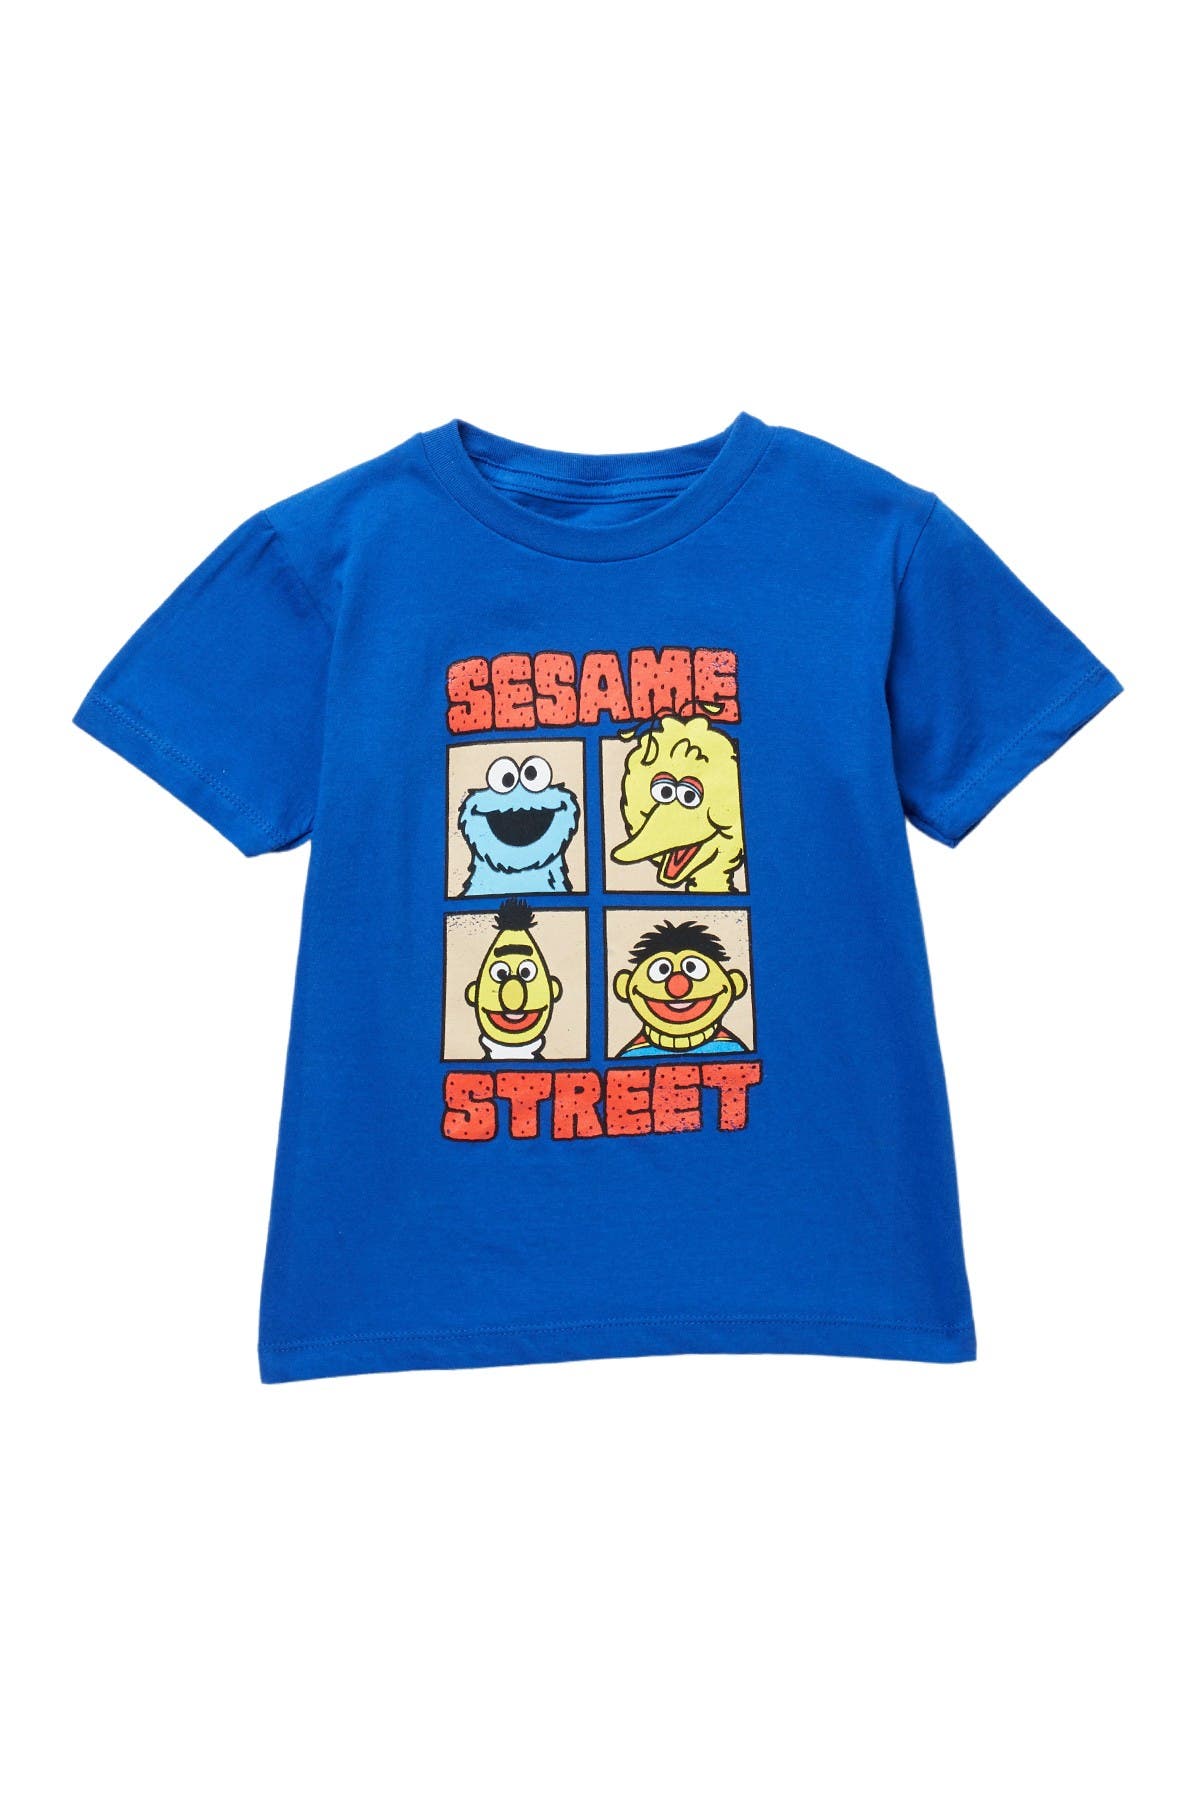 Mighty Fine Kids' Sesame Bunch Tee In Royal